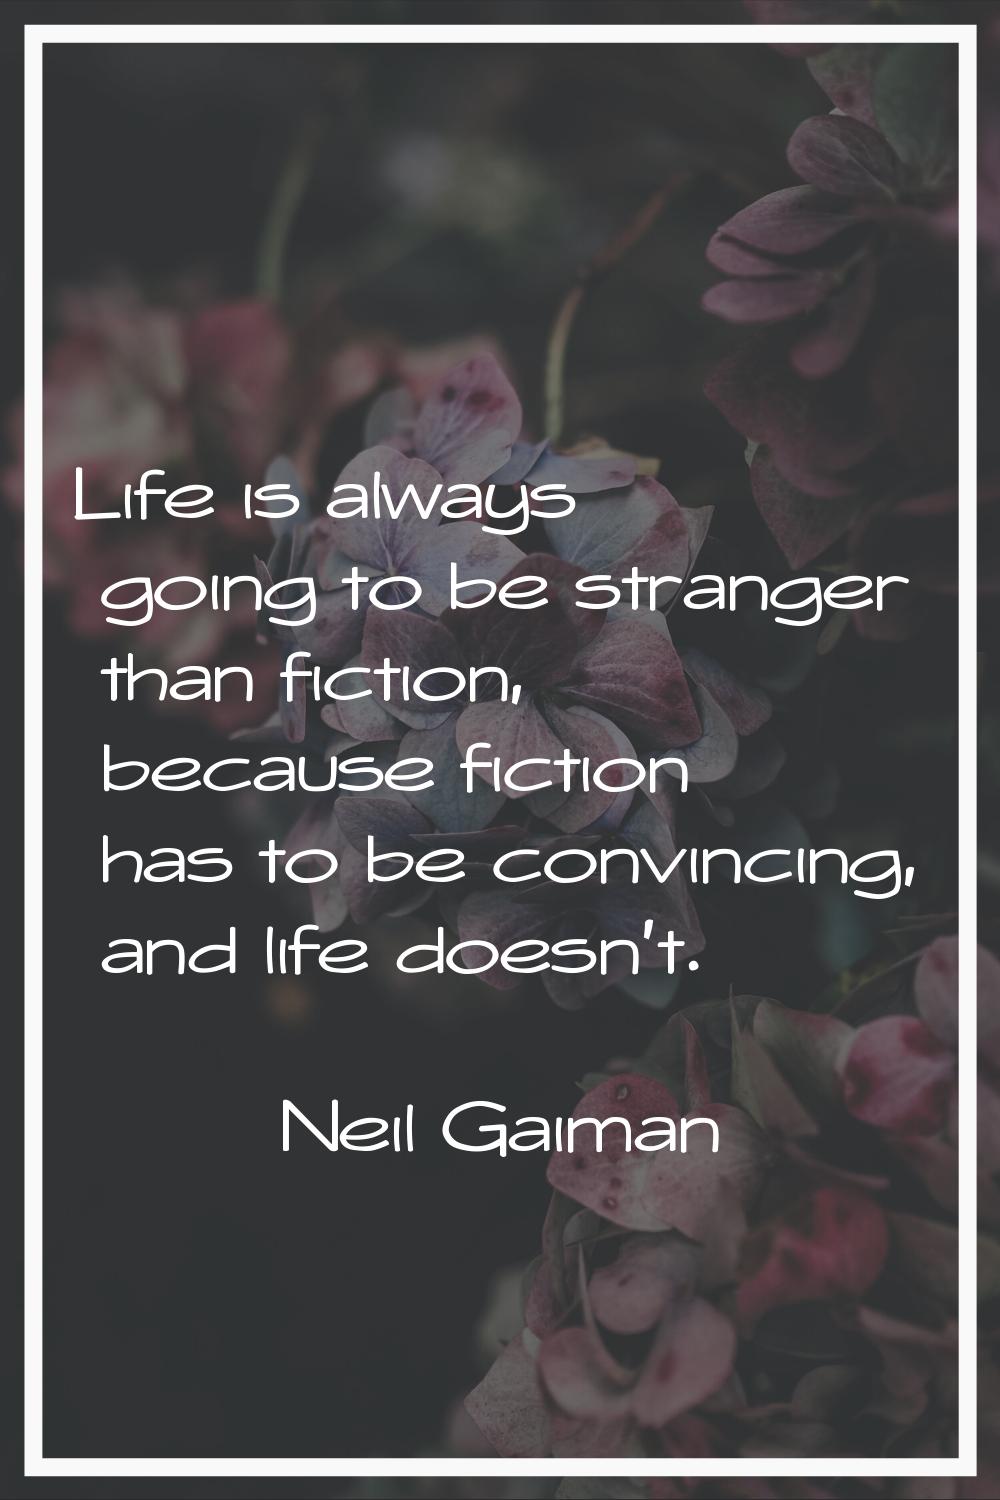 Life is always going to be stranger than fiction, because fiction has to be convincing, and life do